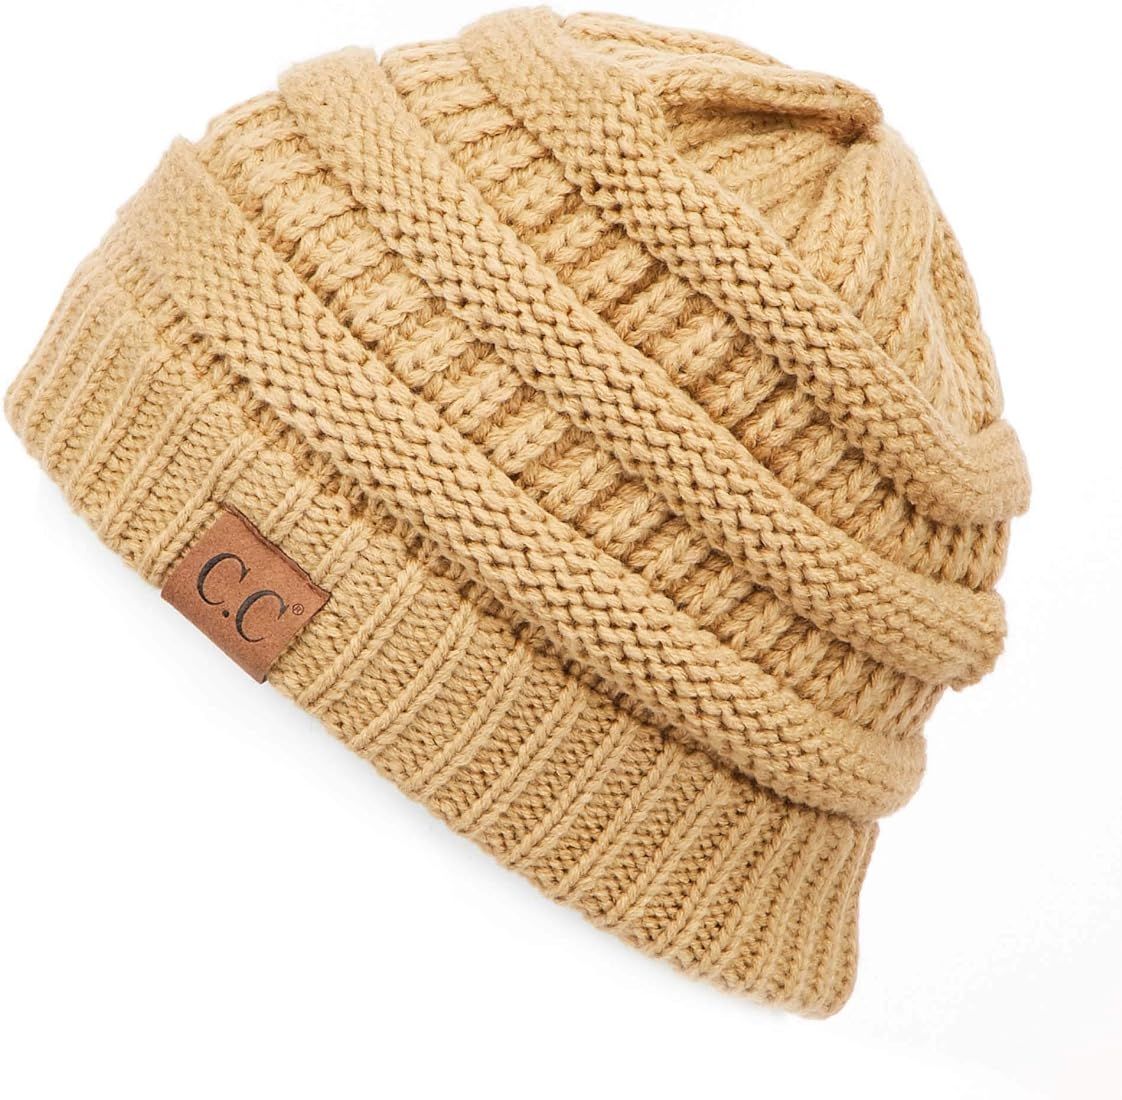 C.C Exclusives Cable Knit Beanie - Thick, Soft & Warm Chunky Beanie Hats (HAT-20A)(HAT-30)(HAT-730) | Amazon (US)